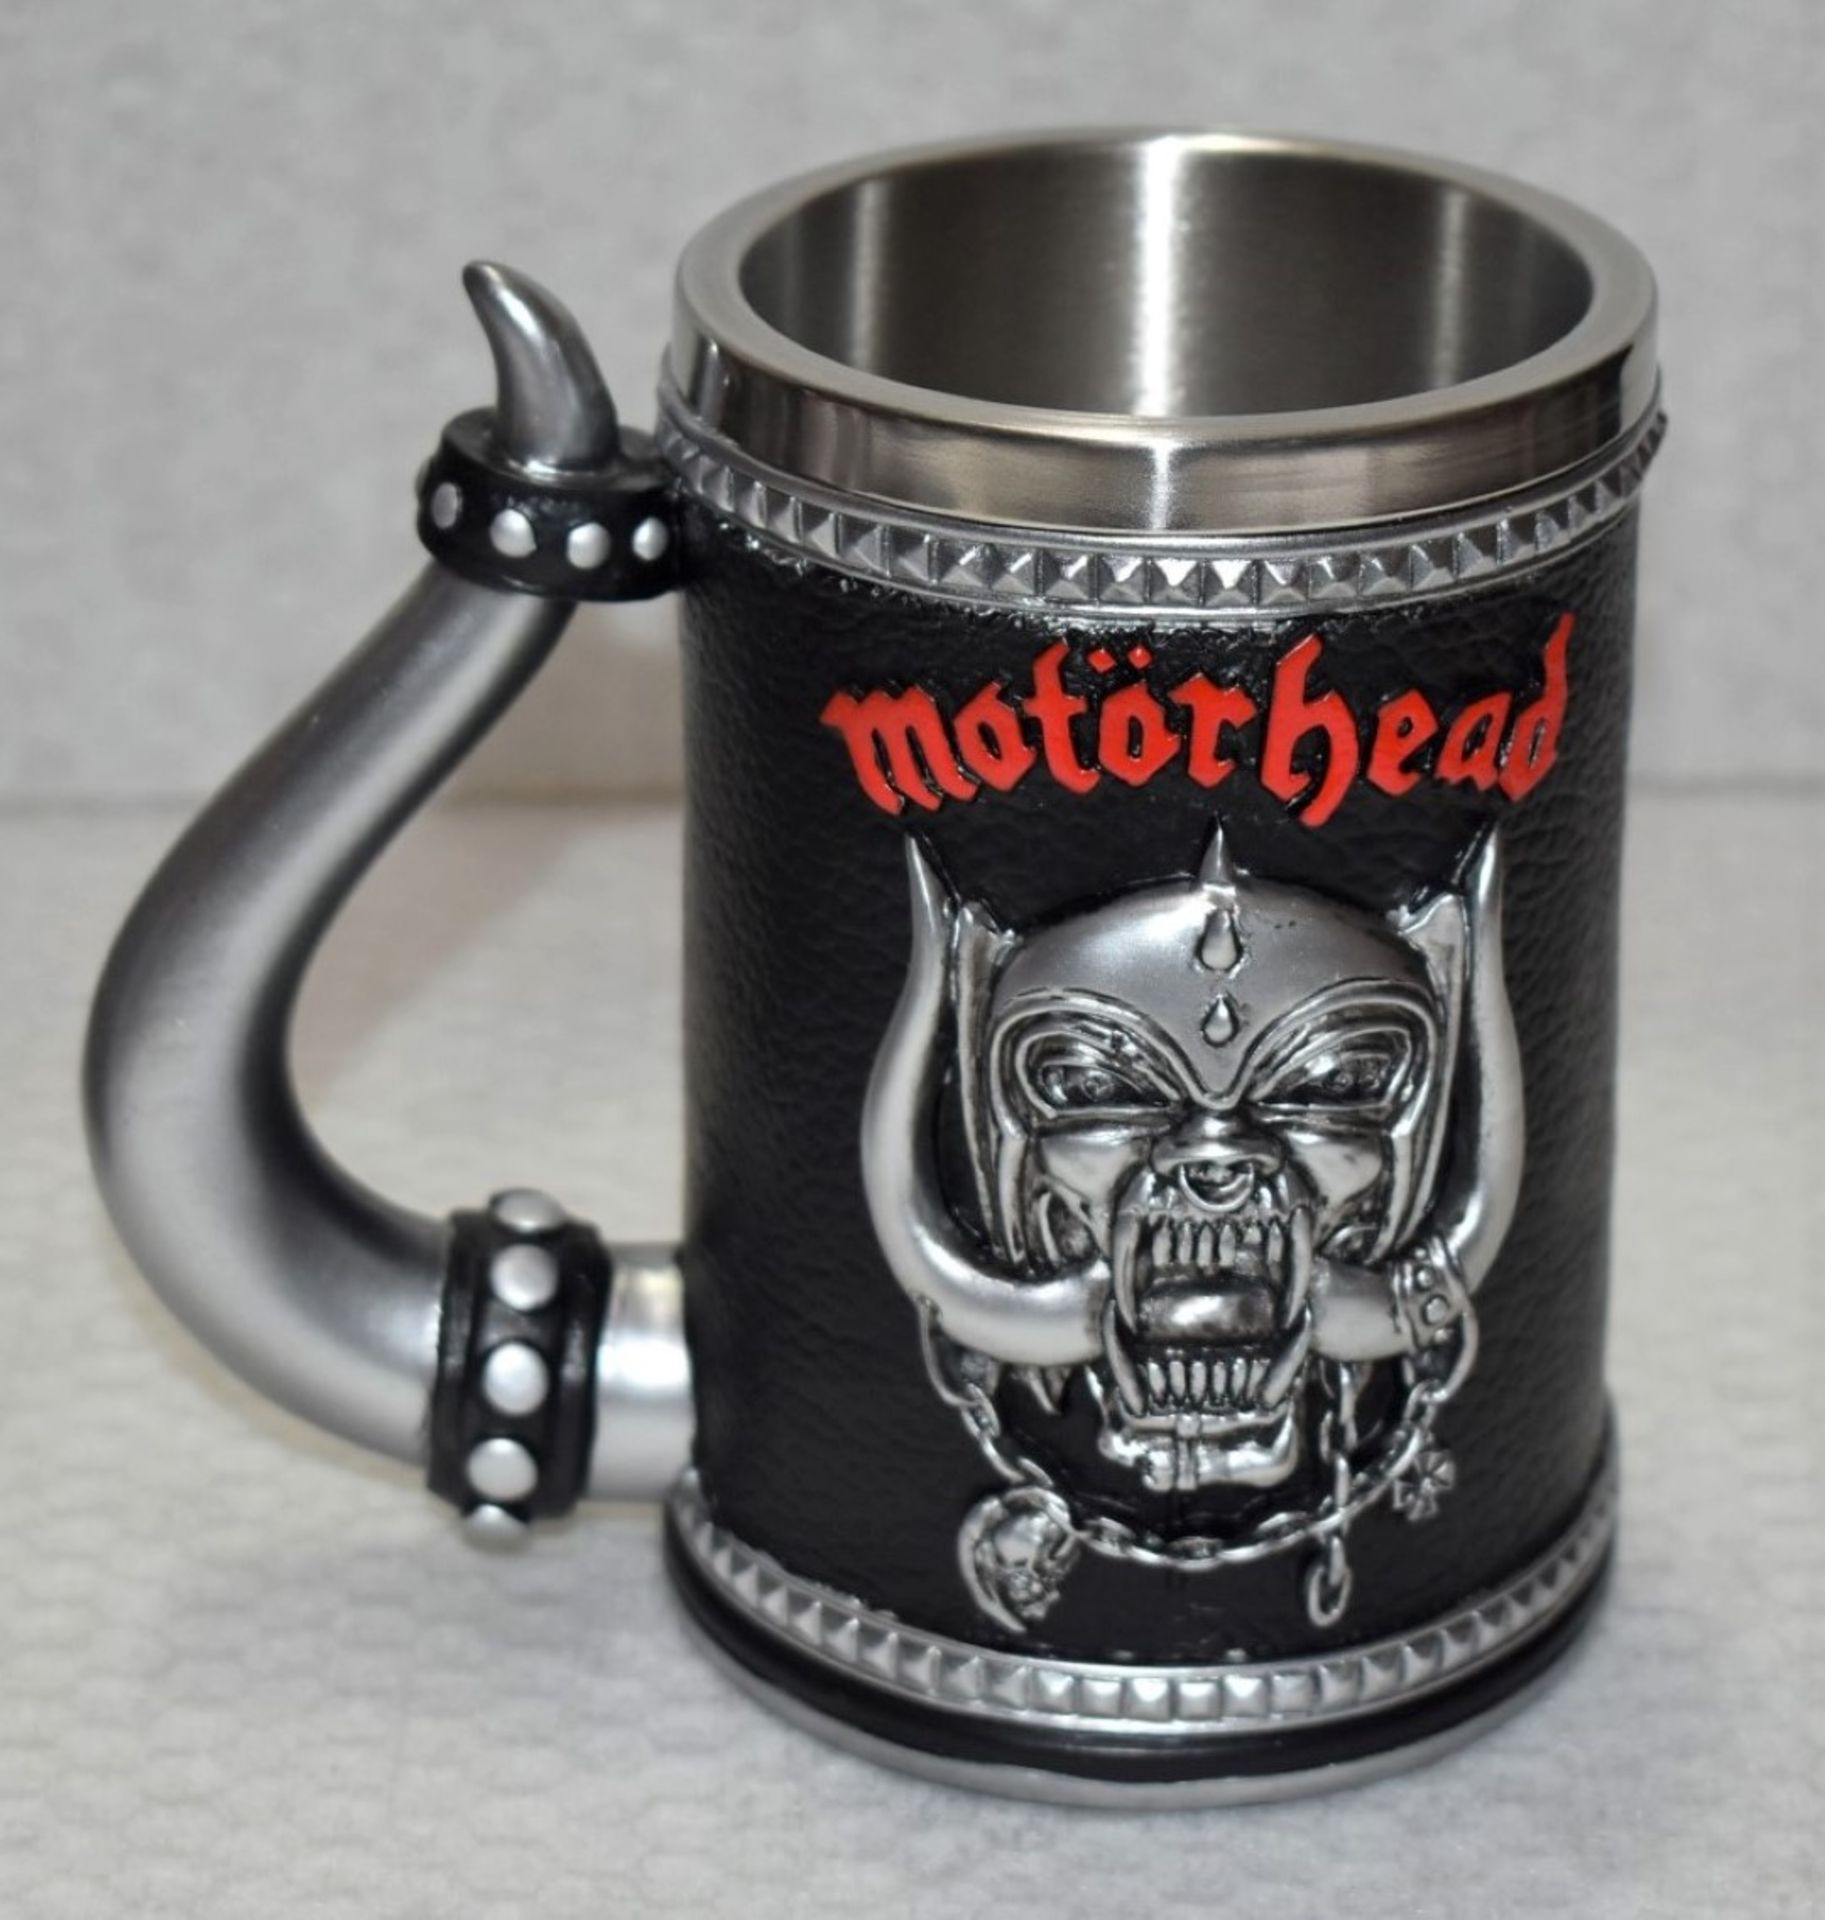 1 x Motorhead Drinks Tanker By Nemesis Now - Features Detailed Warpig Sculpture, Hand Painted - Image 7 of 11